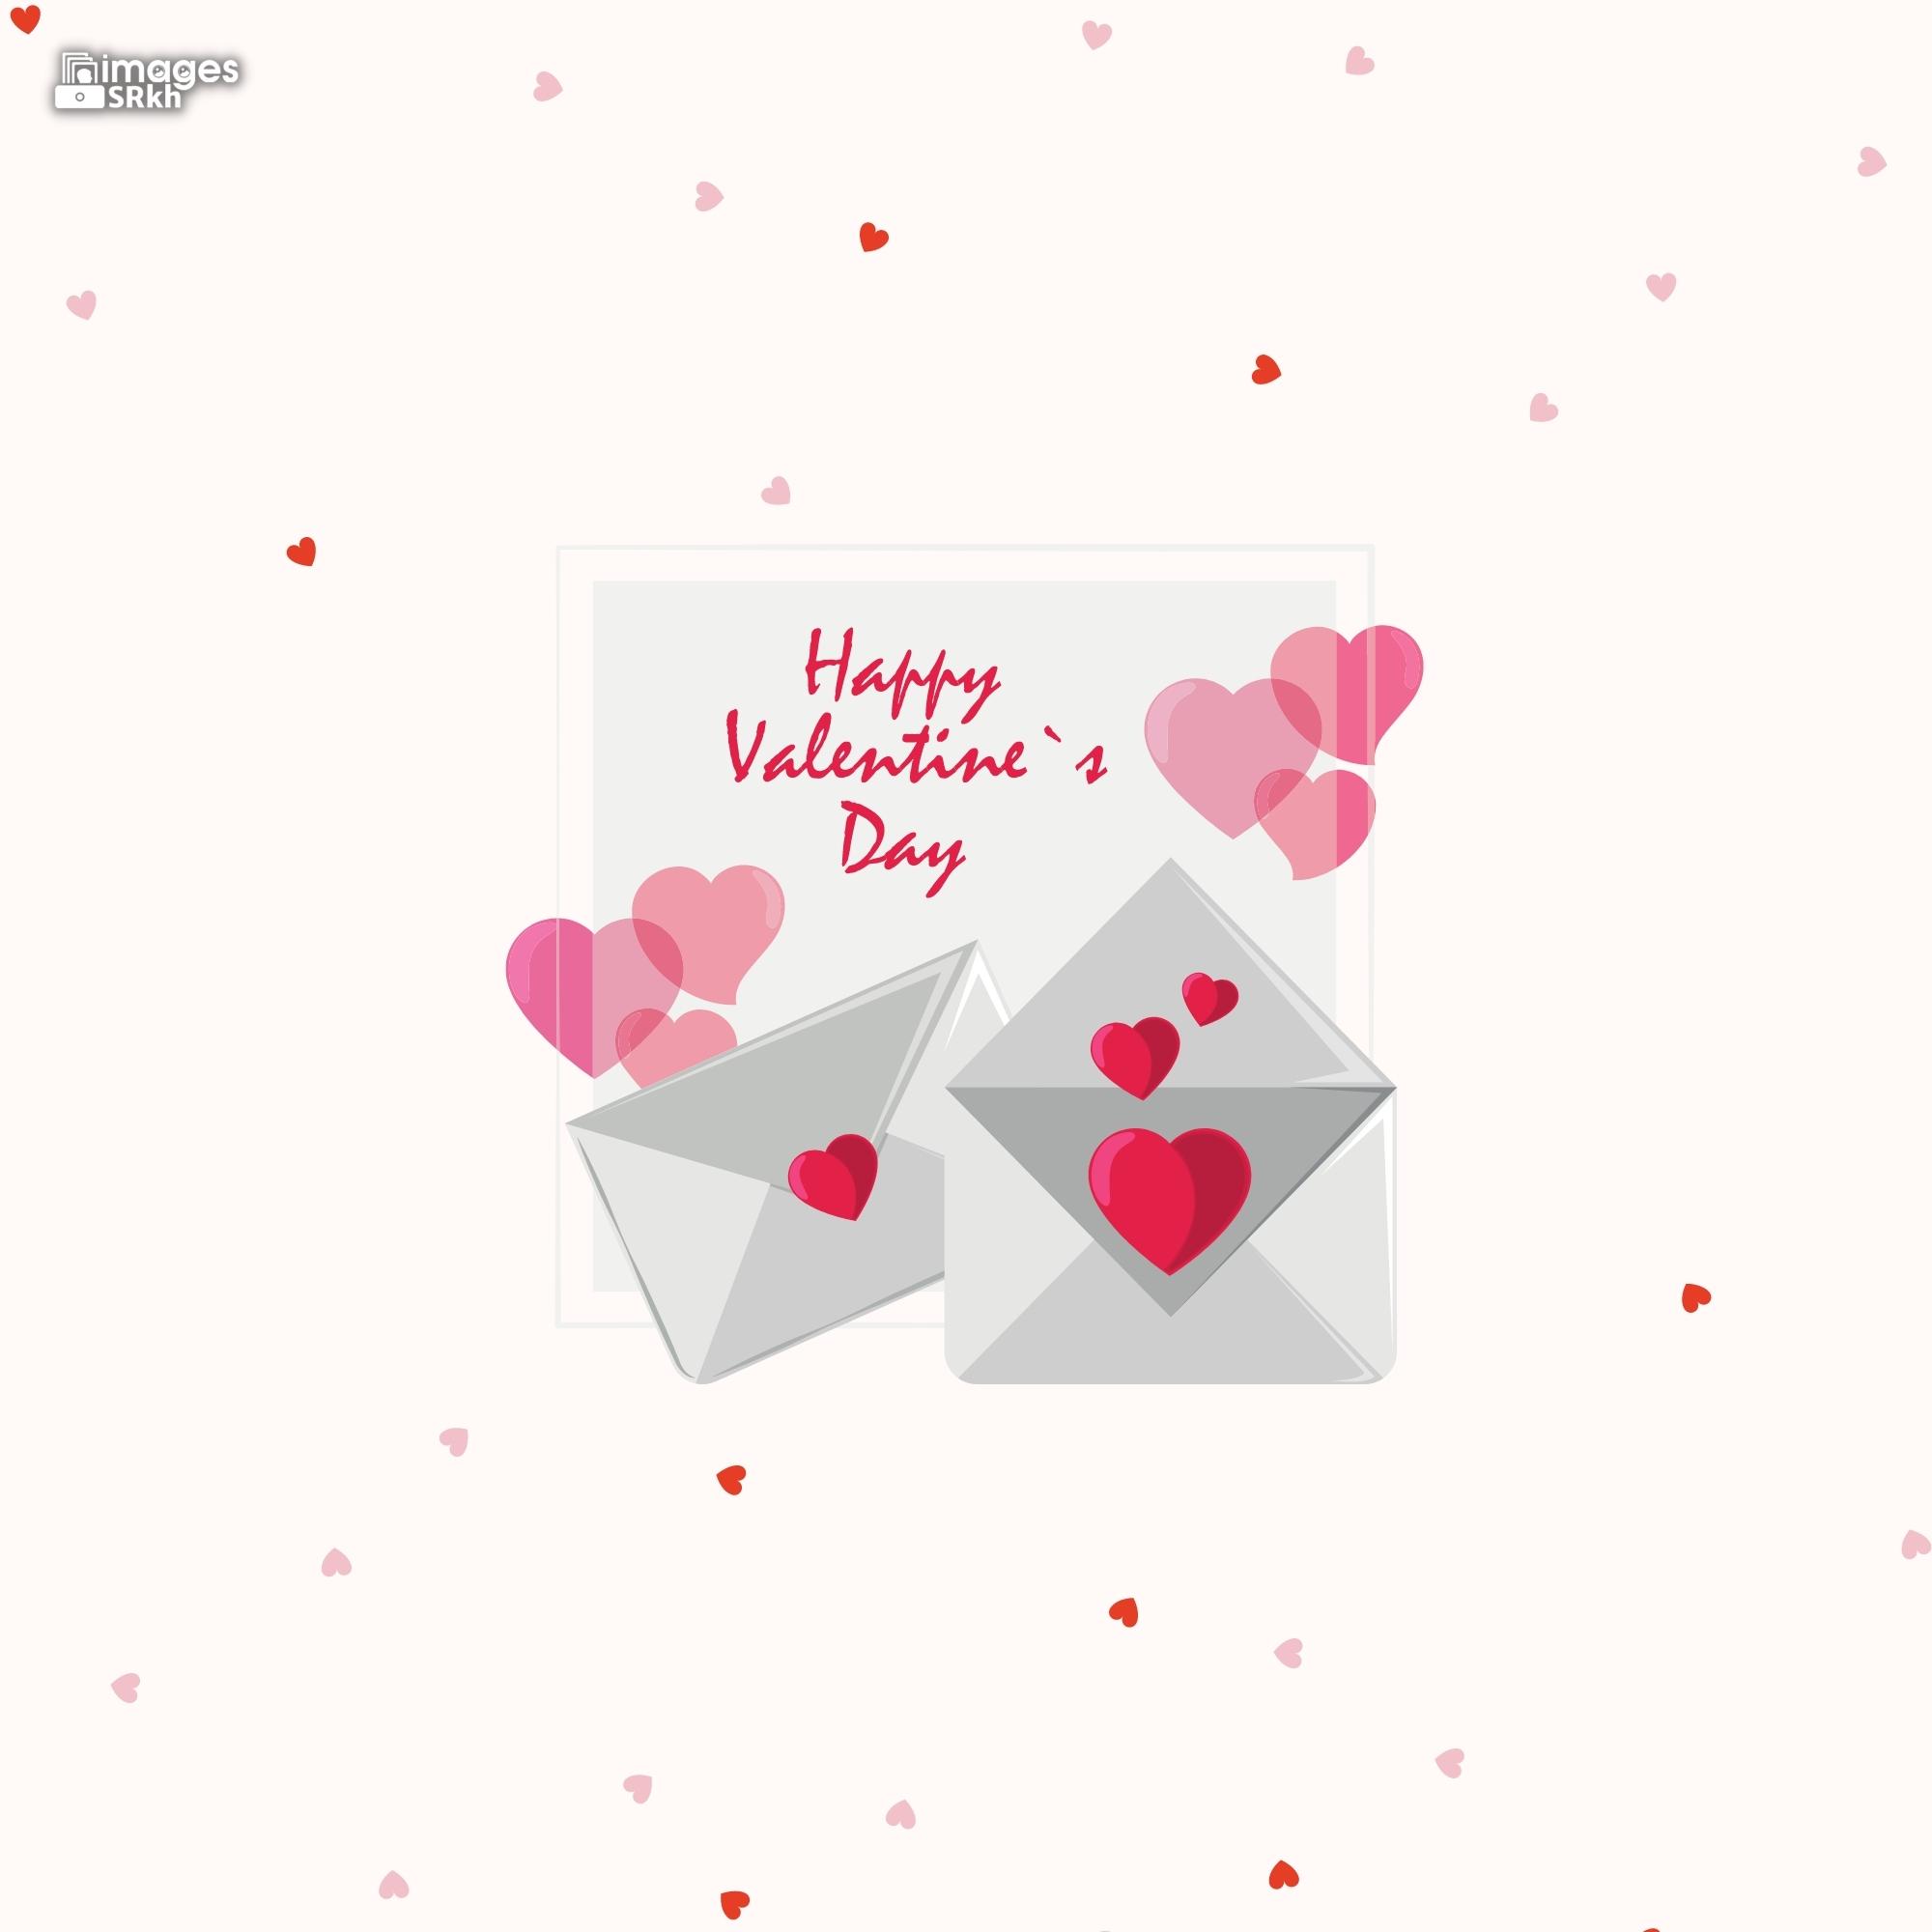 Happy Valentines Day | 493 | PREMIUM IMAGES | Wishes for Love